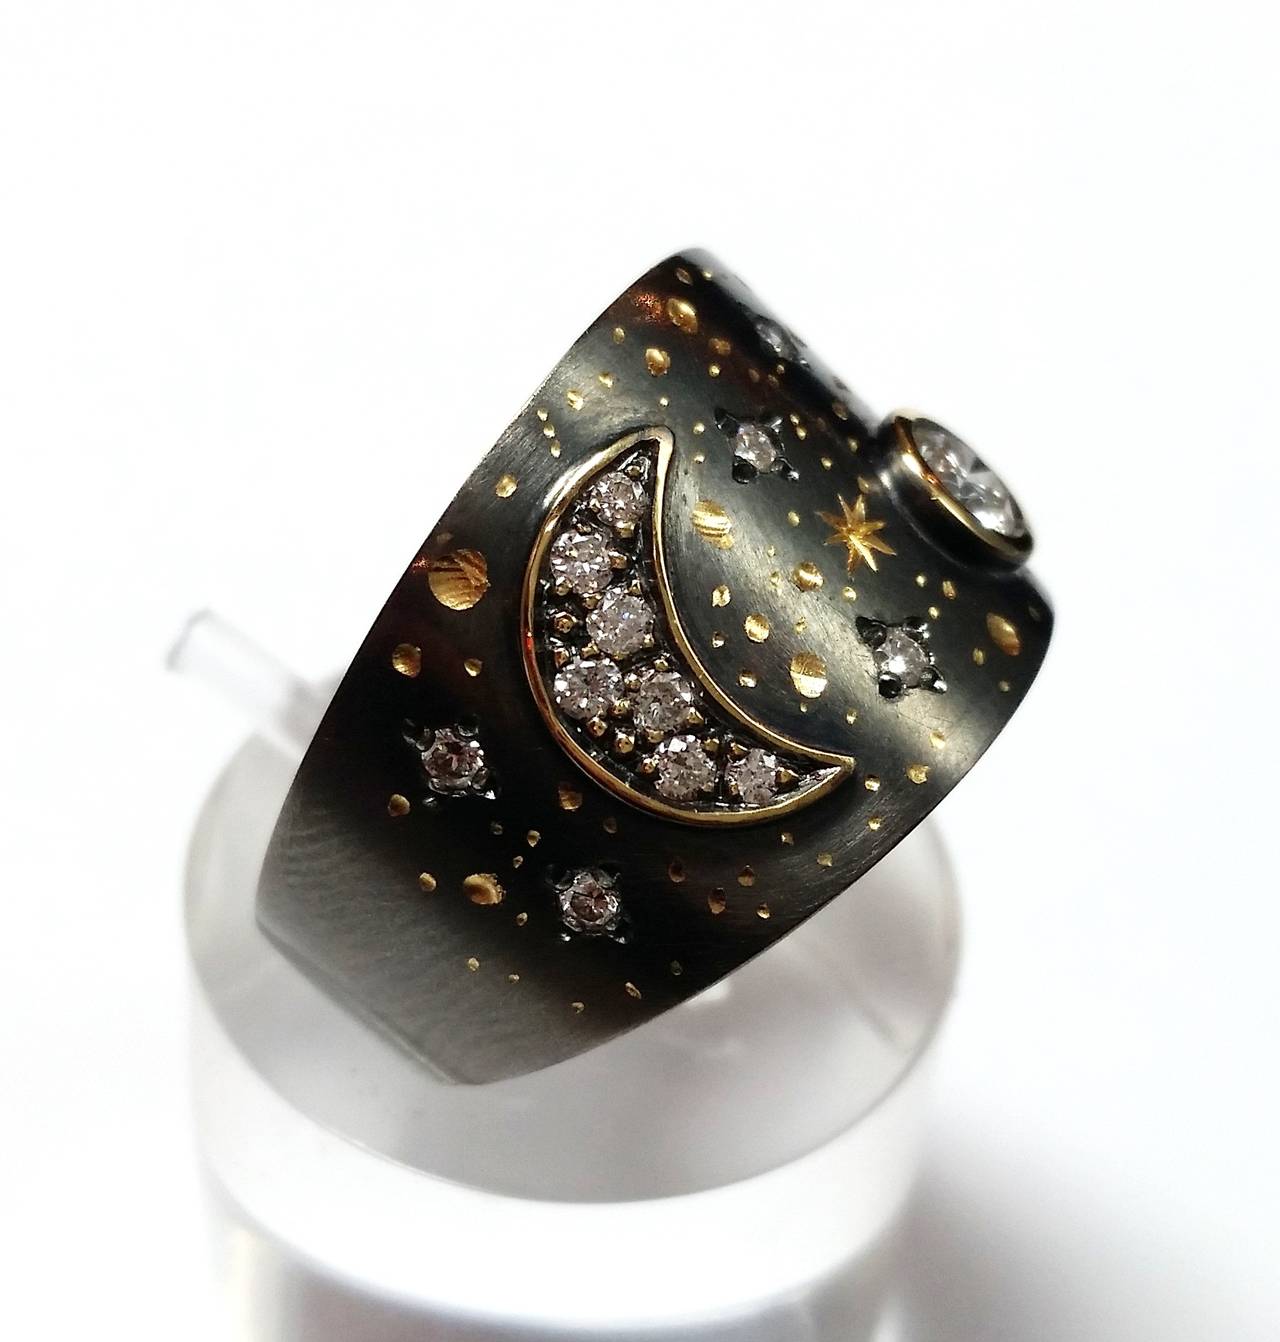 The 'Spanish Night' or 'Nit de Sant Joan' ring is designed by Spanish artist and jeweler, Vicente Gracia. 

Representing a Spanish night with the moon and the stars, it is made in gold and diamonds (one weights 0.33ct and 0.12ct the rest of them).